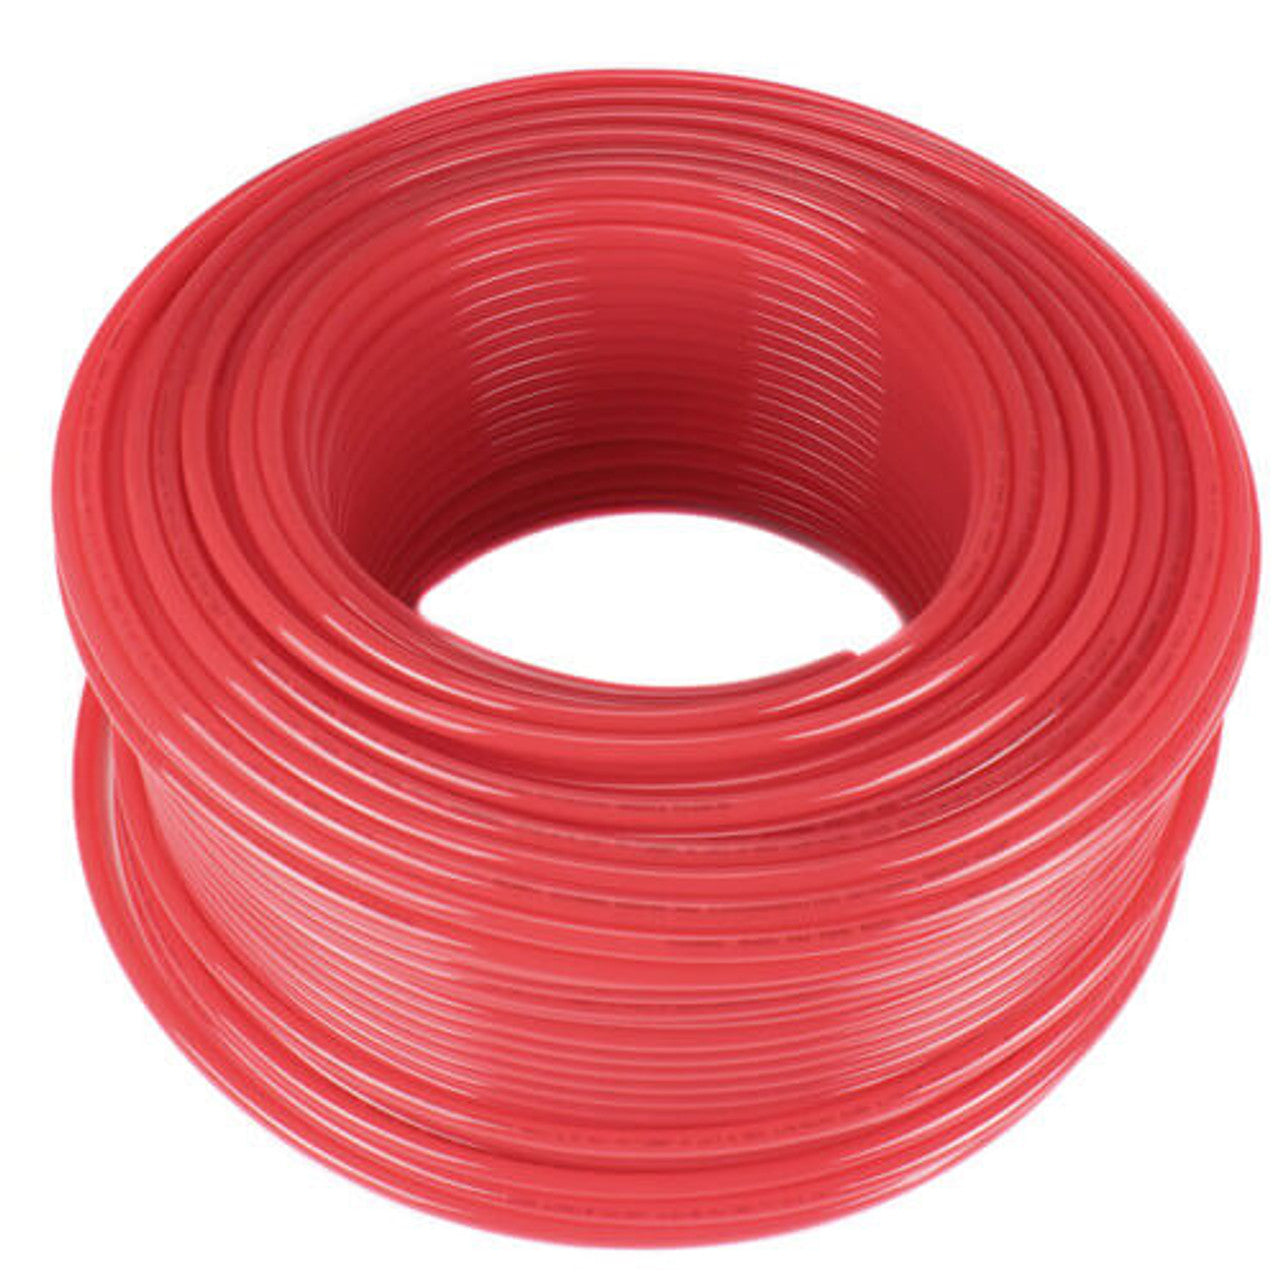 3/4" x 500' PEX-A Potable Water - 500' Coil - Red